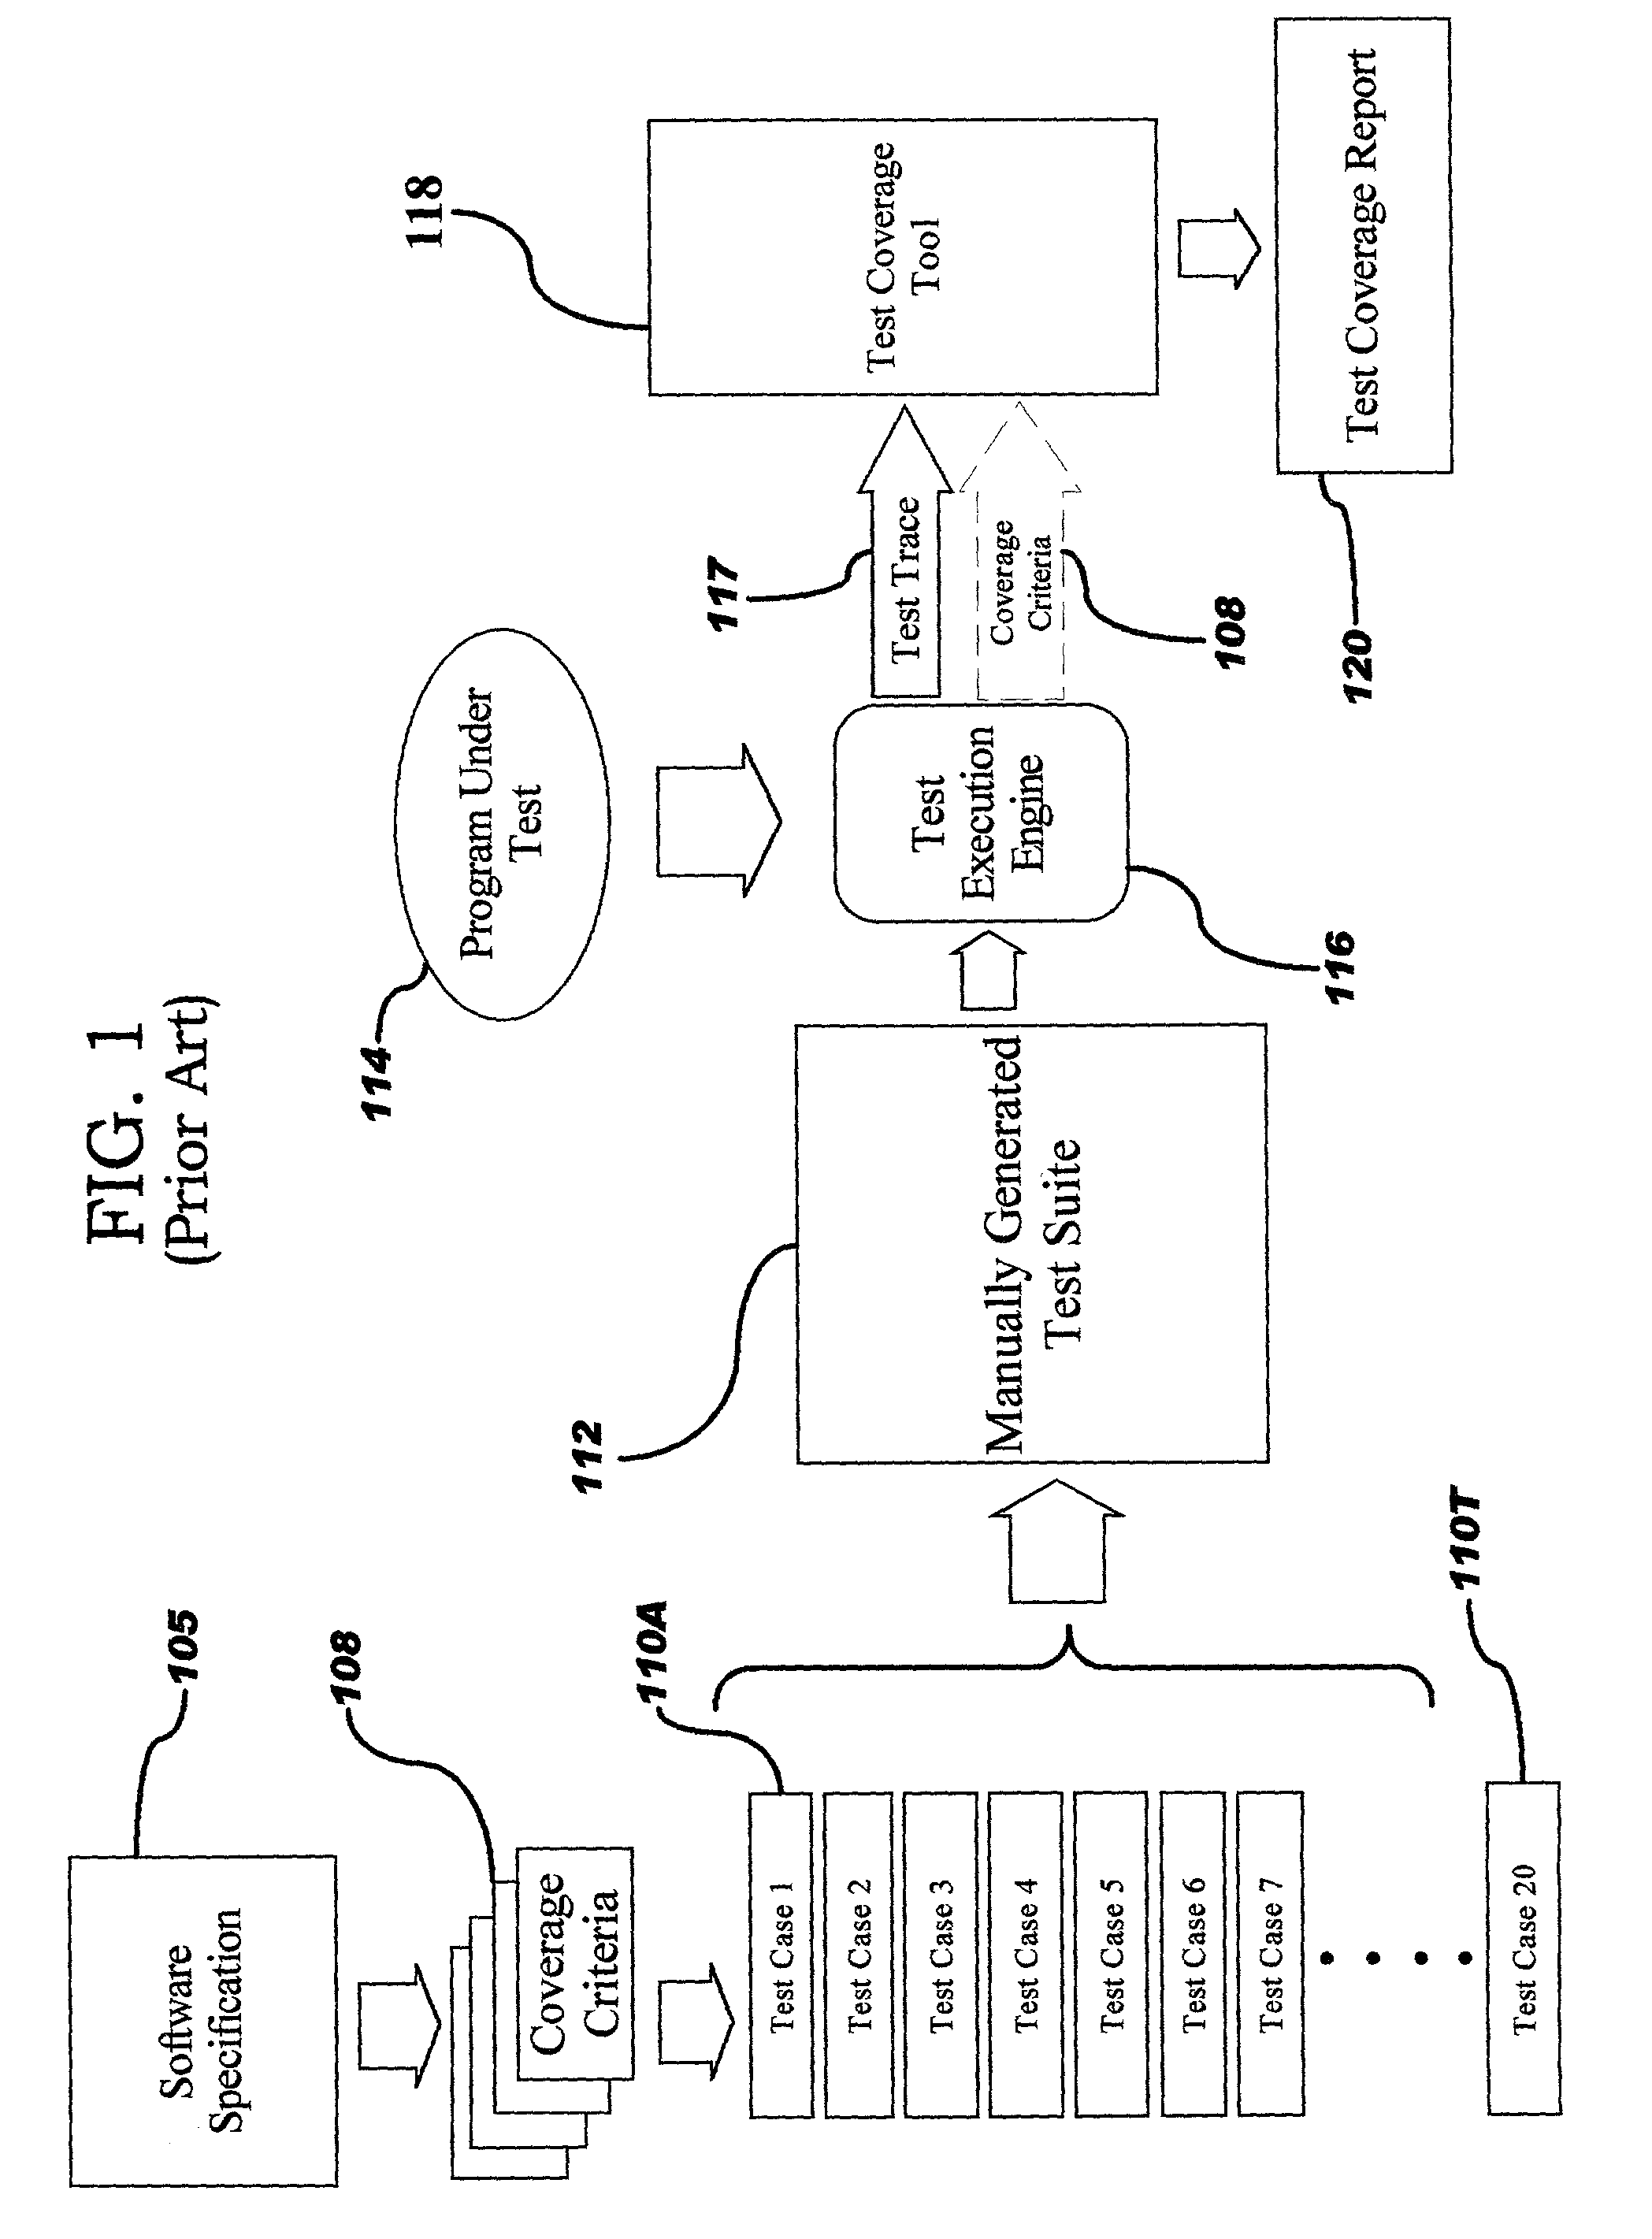 Method and system for integrating test coverage measurements with model based test generation